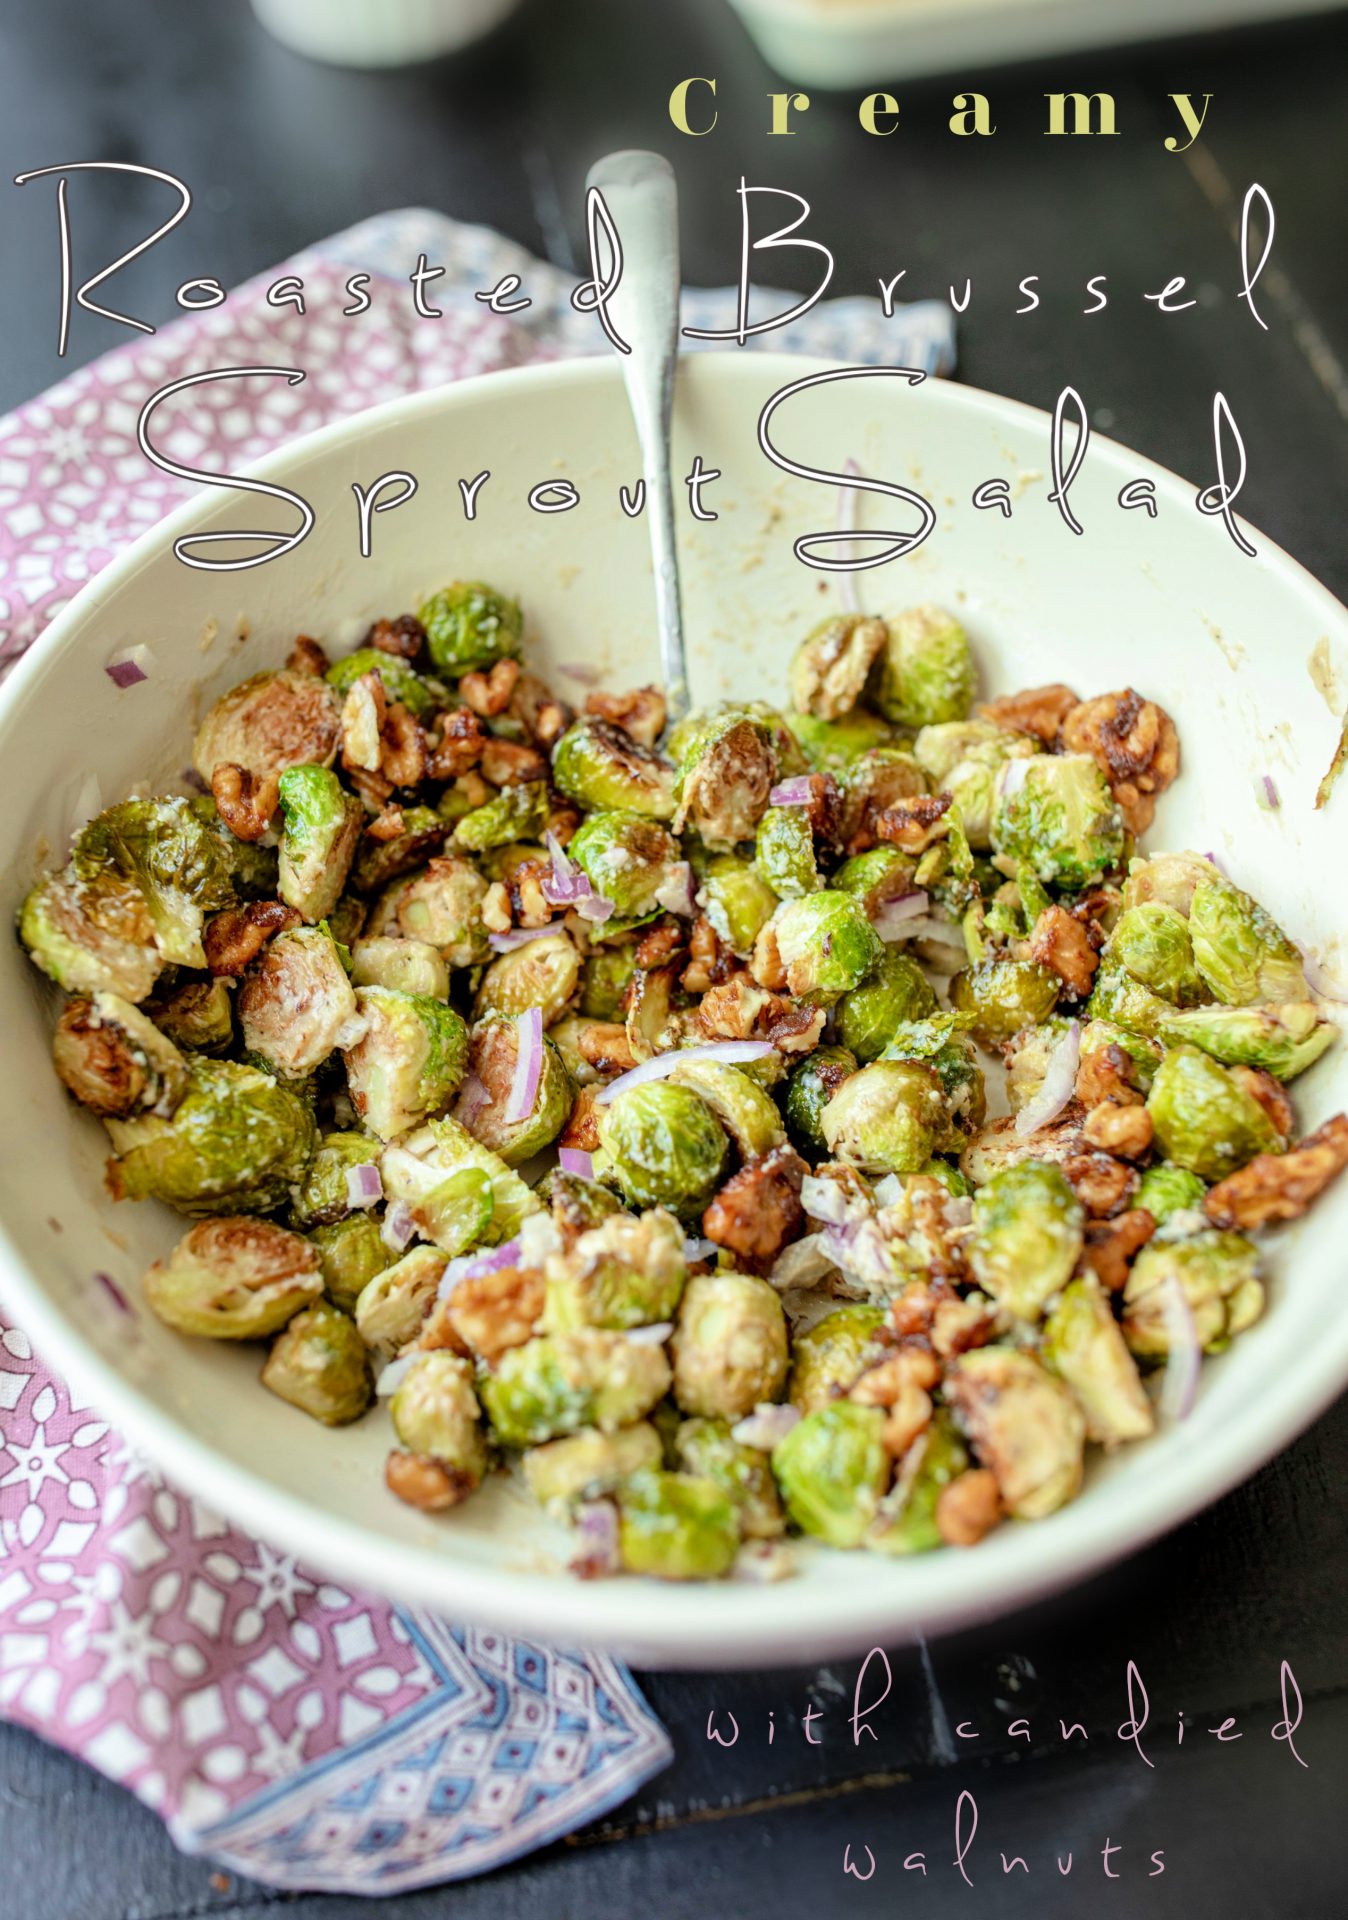 brussels sprouts, vegan, salad, brussel sprout salad, summer recipe, easy, creamy, walnuts, roasted, vegetable side dish, roasted vegetables, onion, healthy eating, summer picnic, barbecue